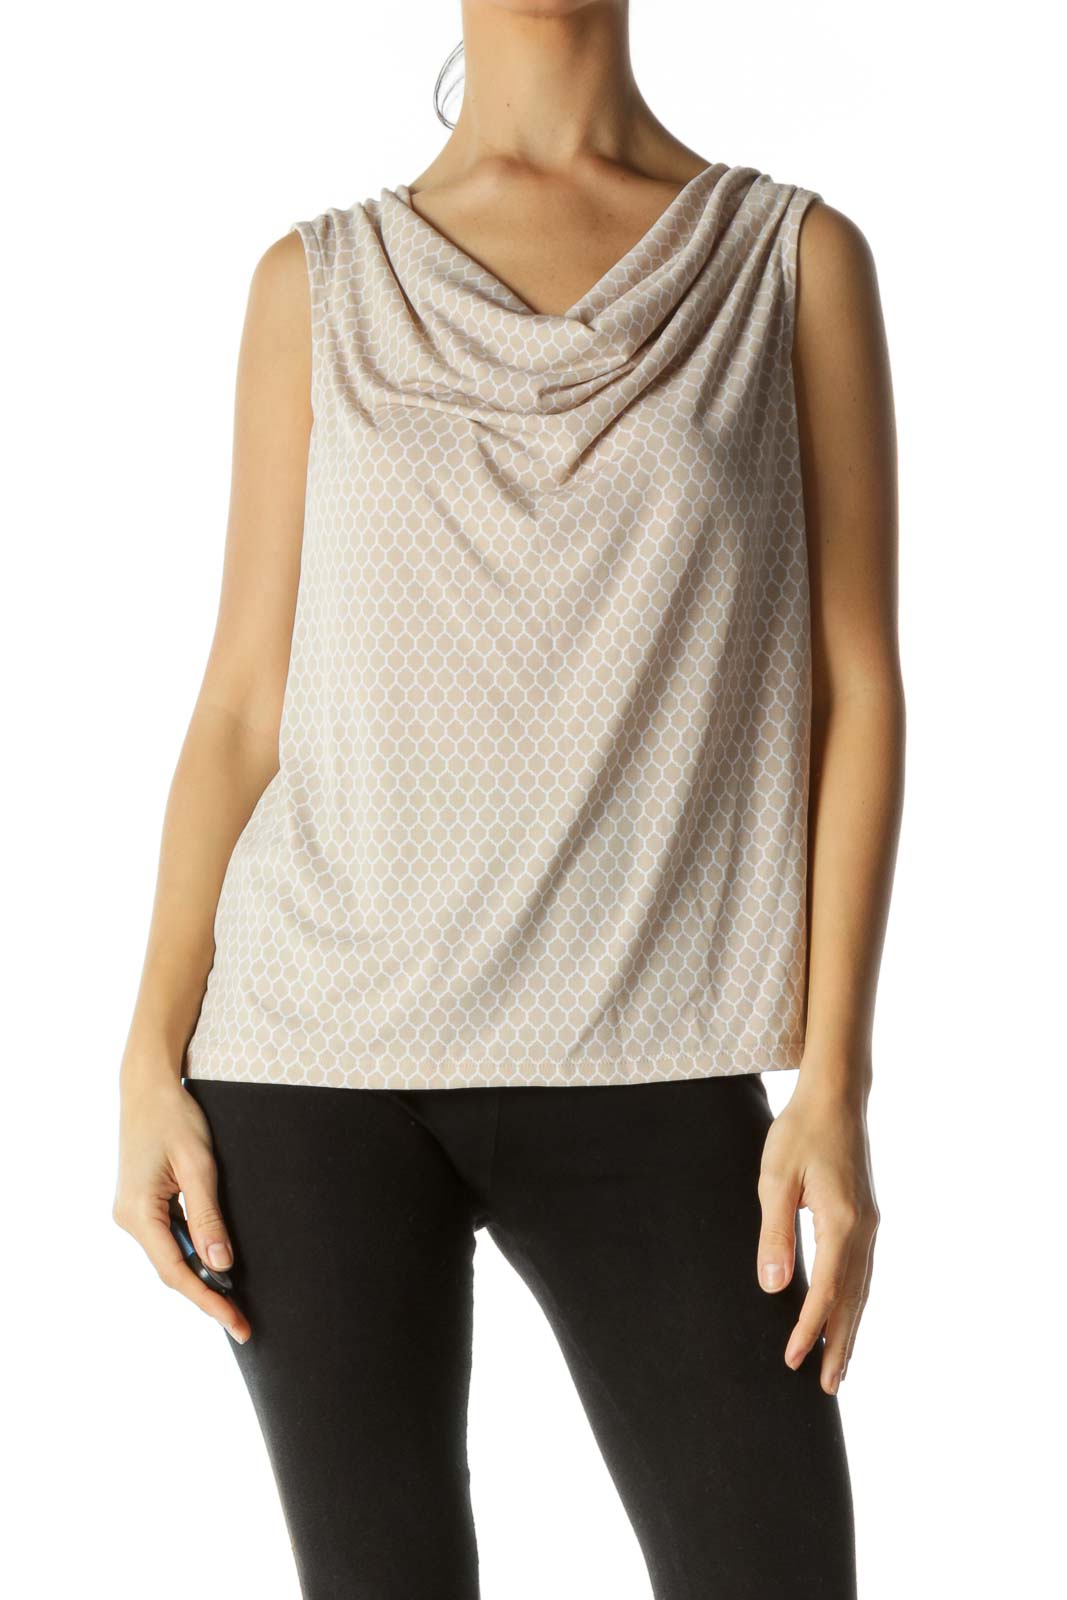 Beige White Print Cowl Neck Stretch Top Front